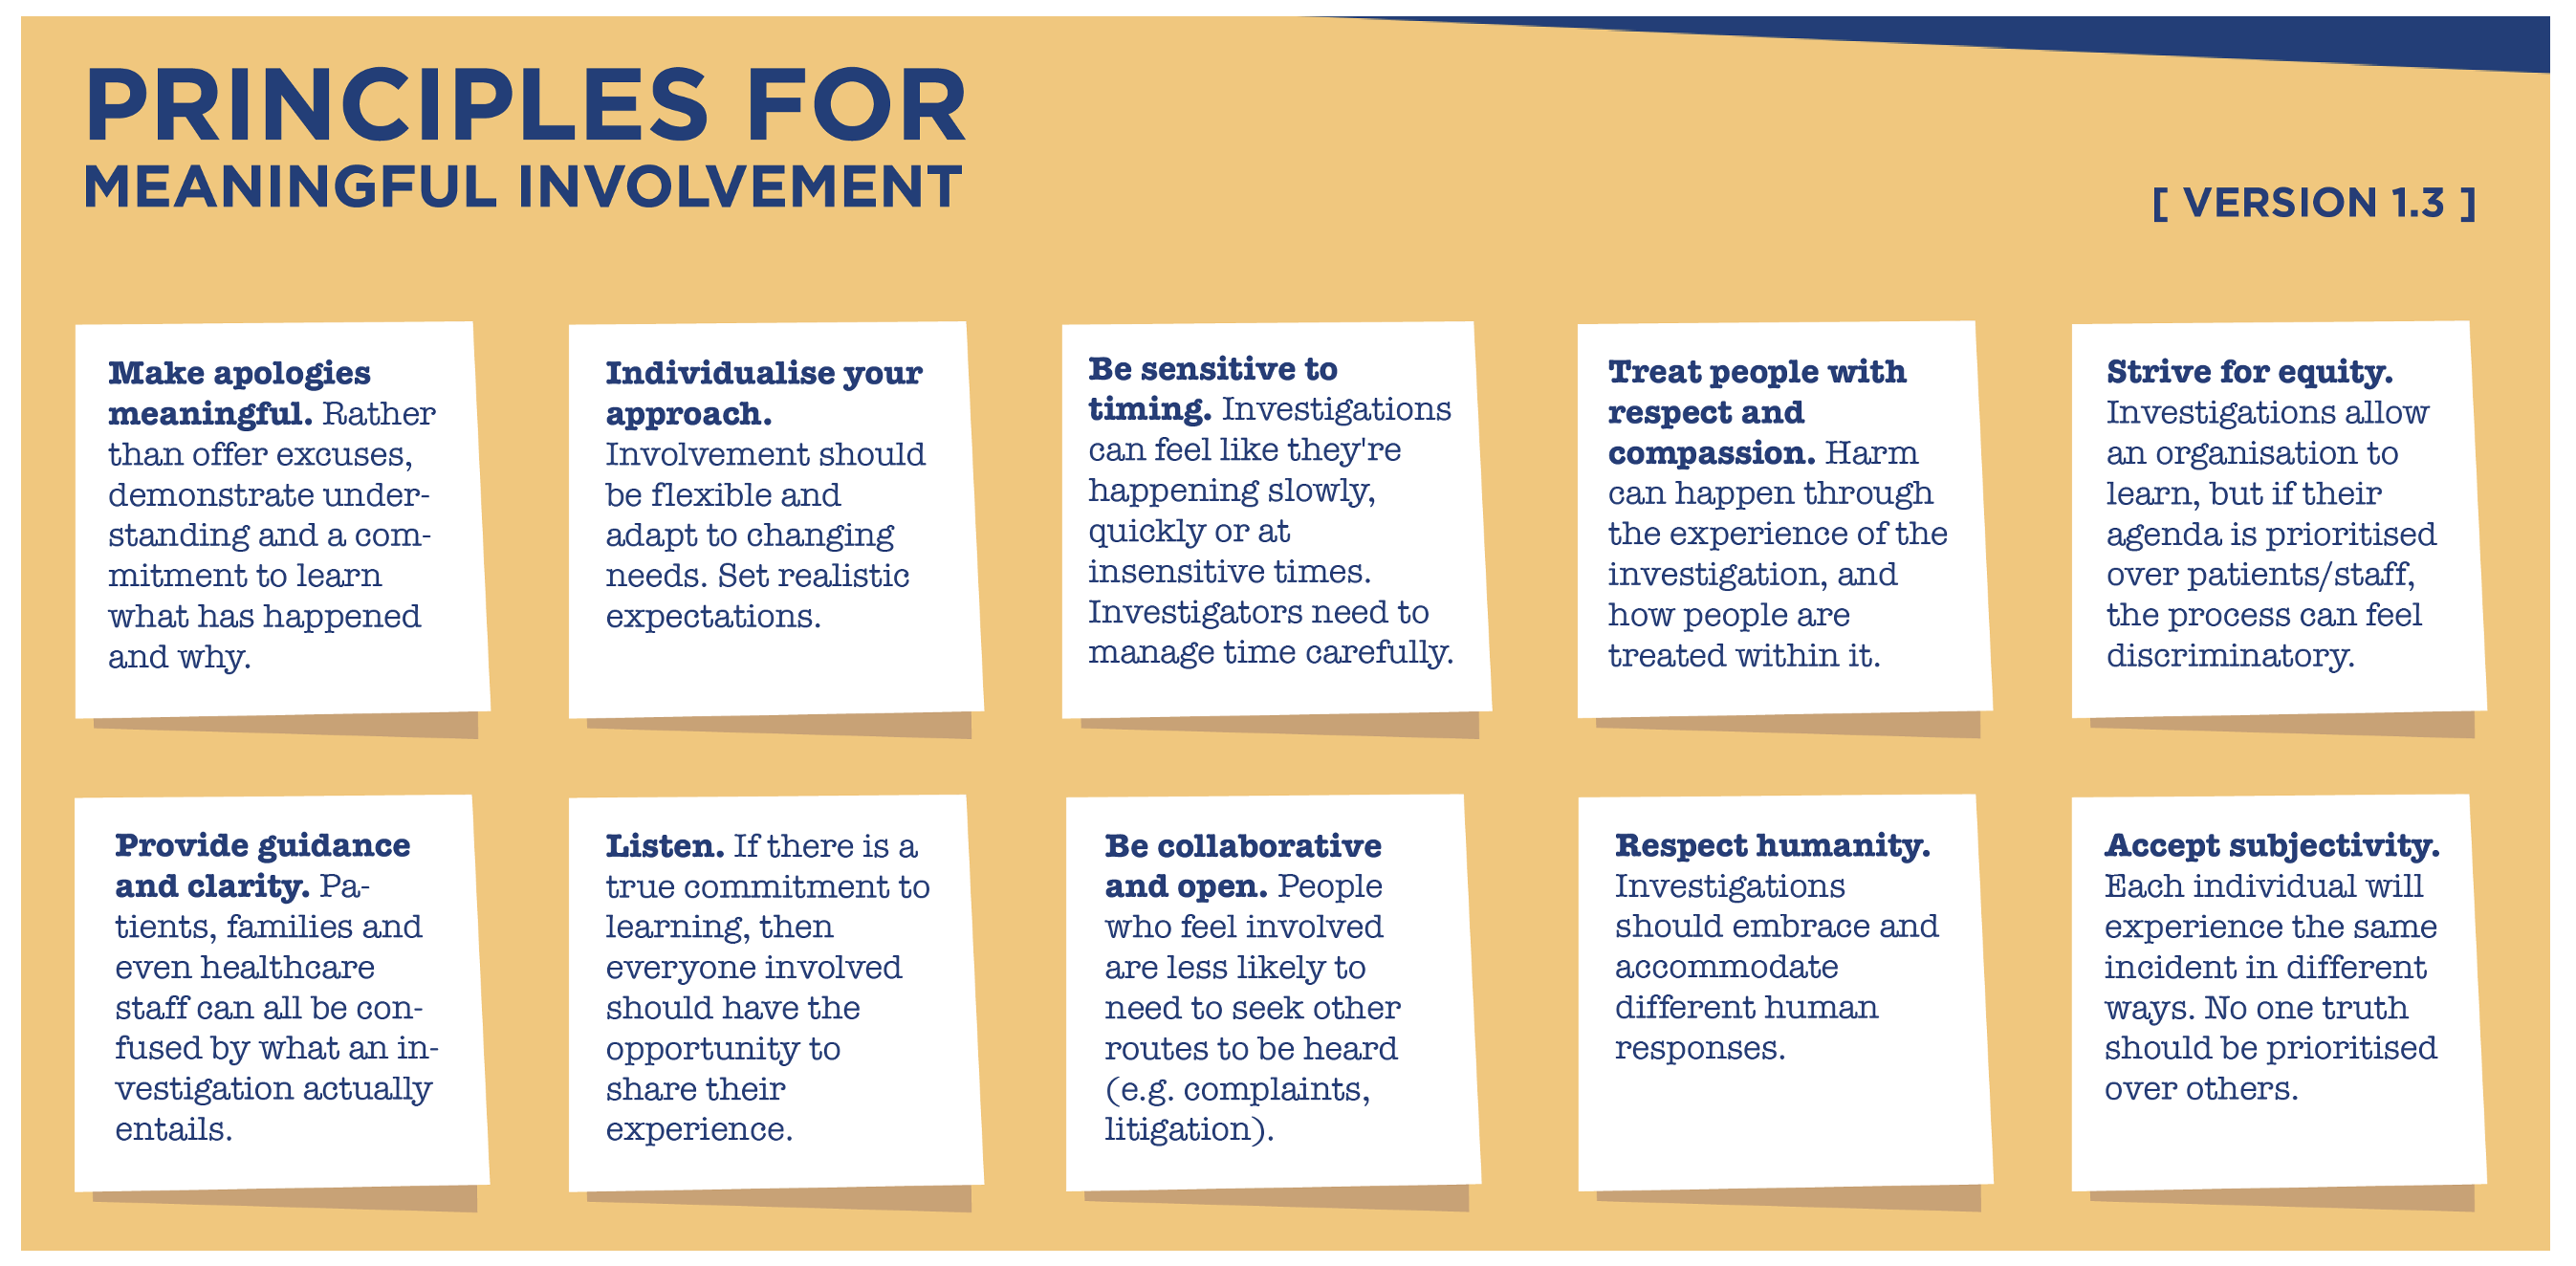 Chart showing the principles for meaningful involvement